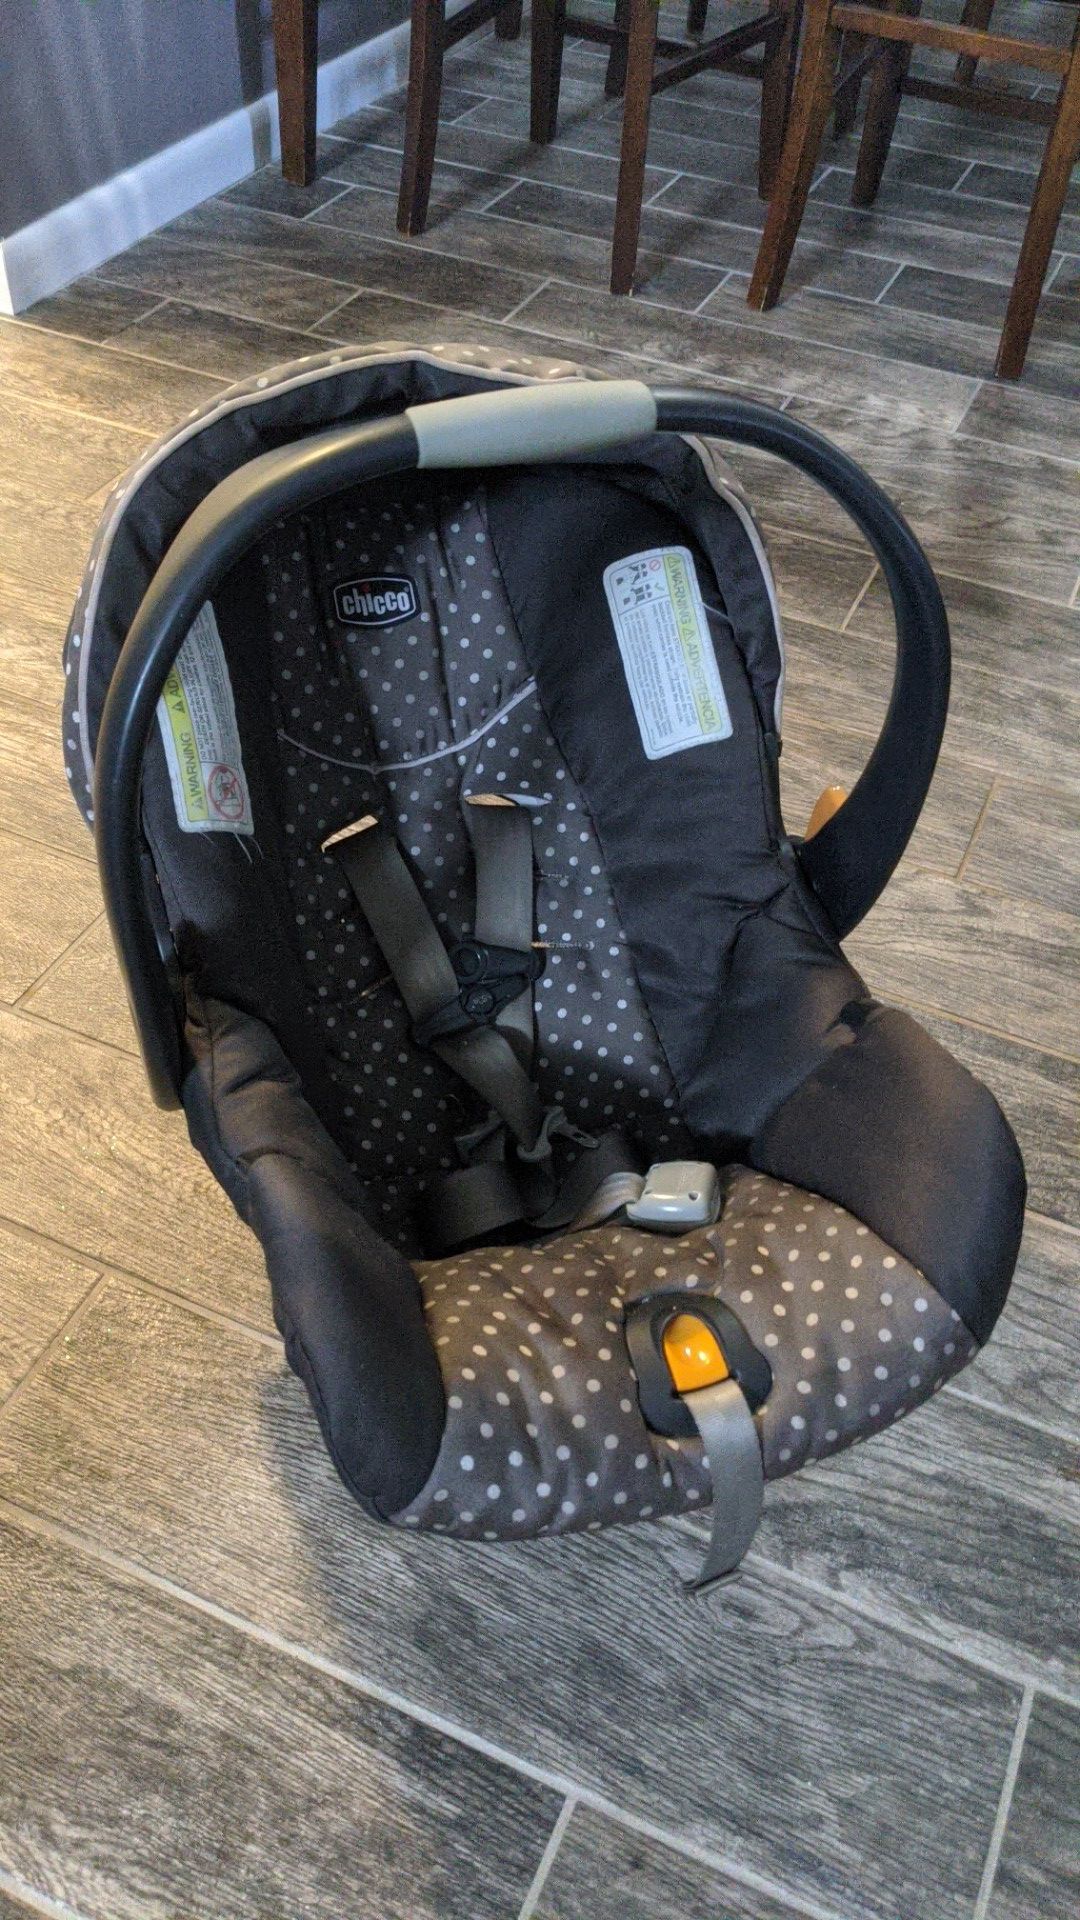 Chicco car seat with two bases. One for both parents!